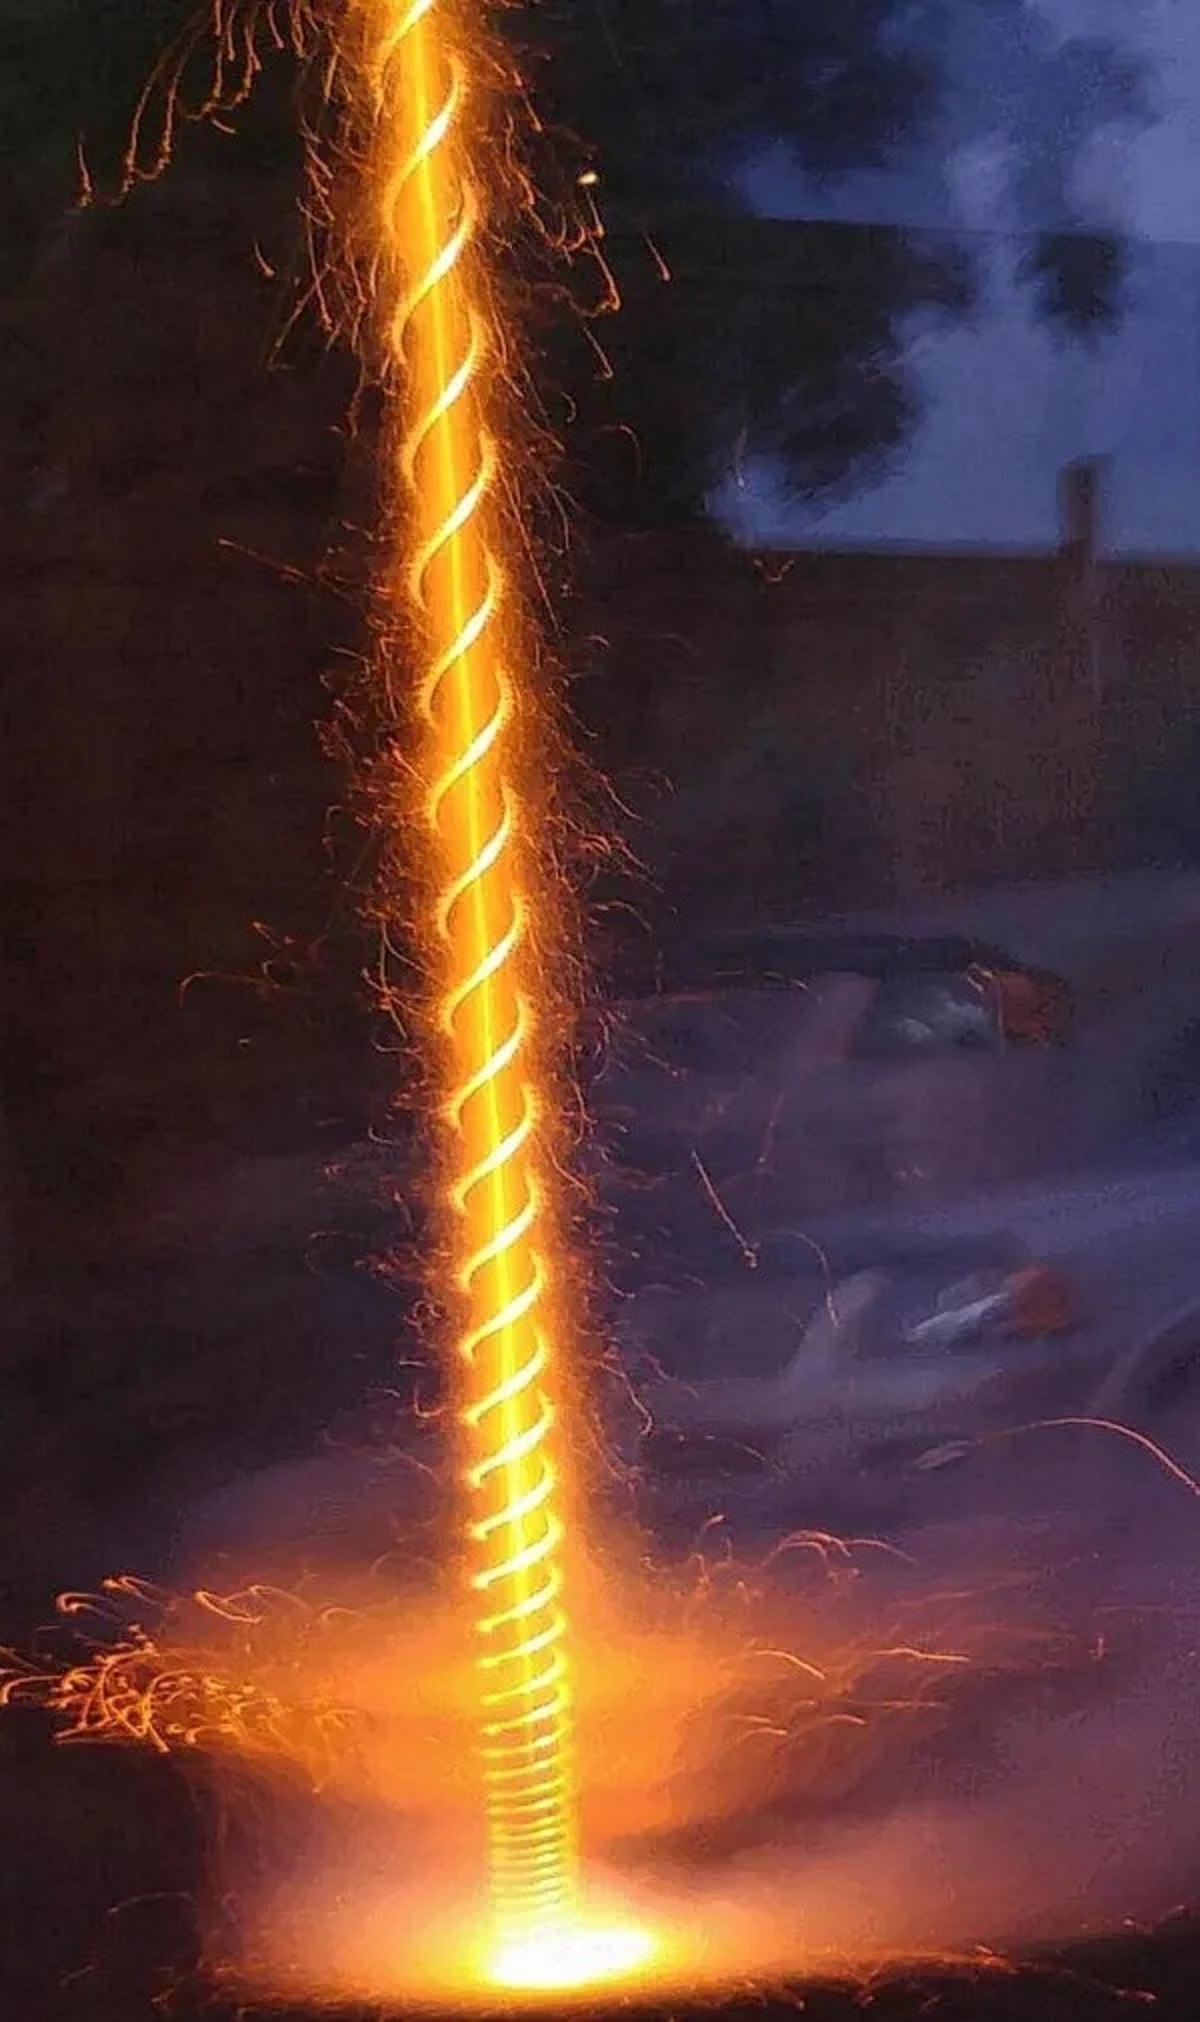 Long exposure photo of a firework going off.